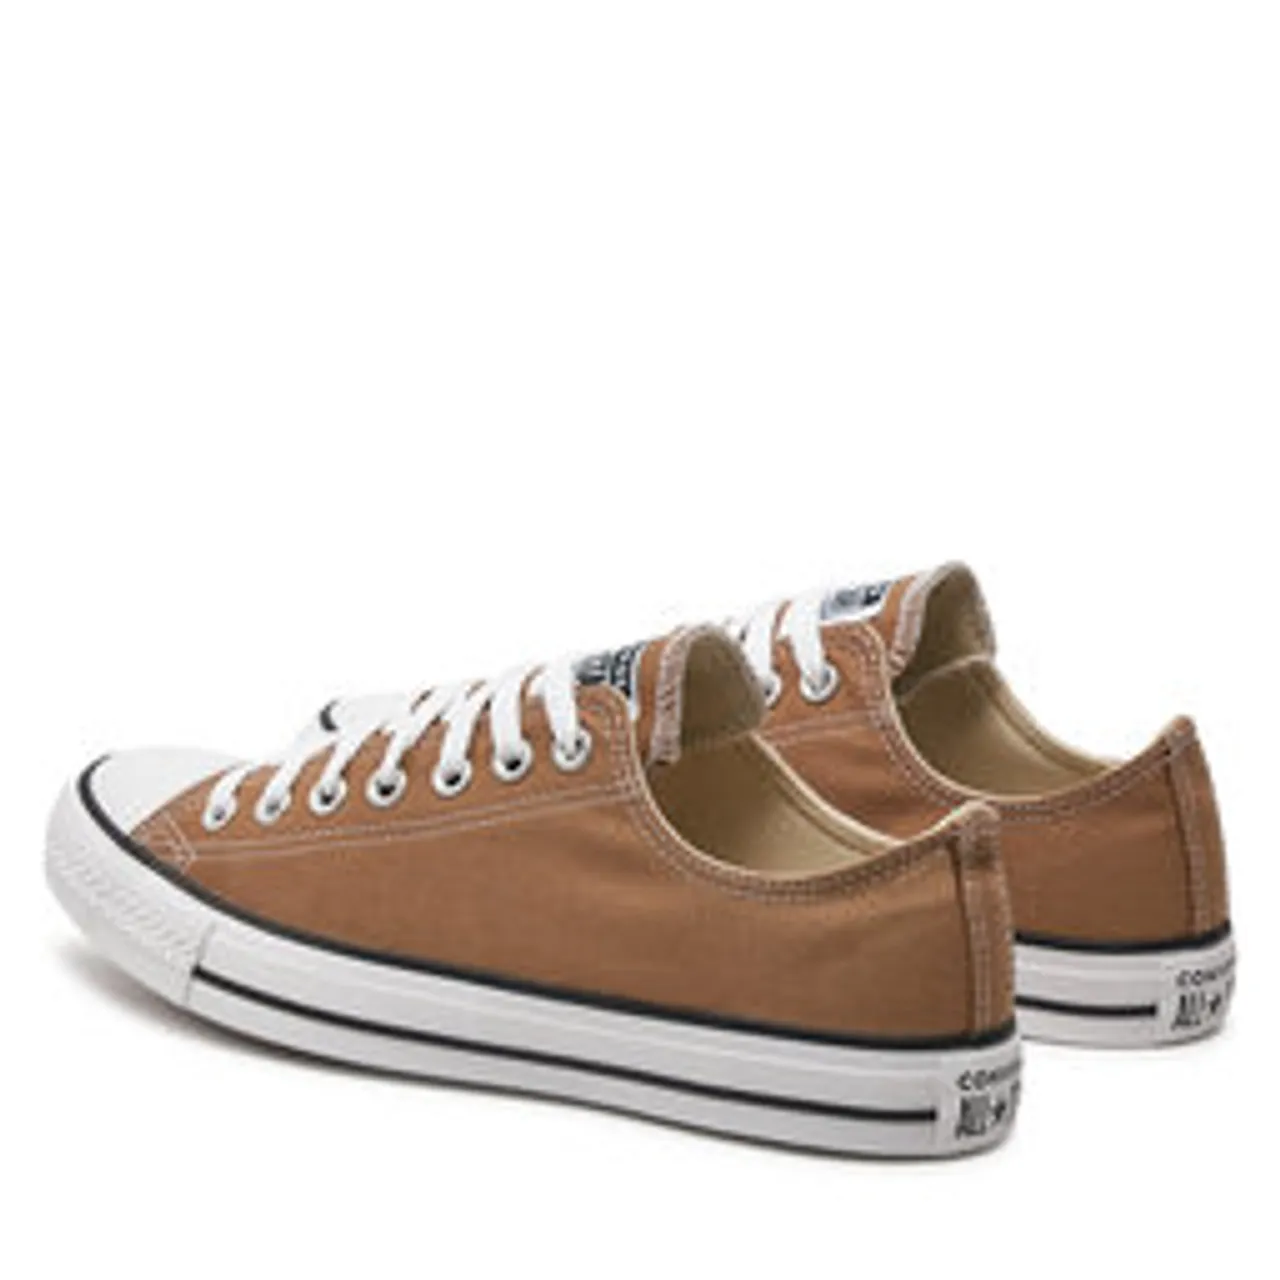 Sneakers aus Stoff Converse Chuck Taylor All Star A06564C Hot Tea